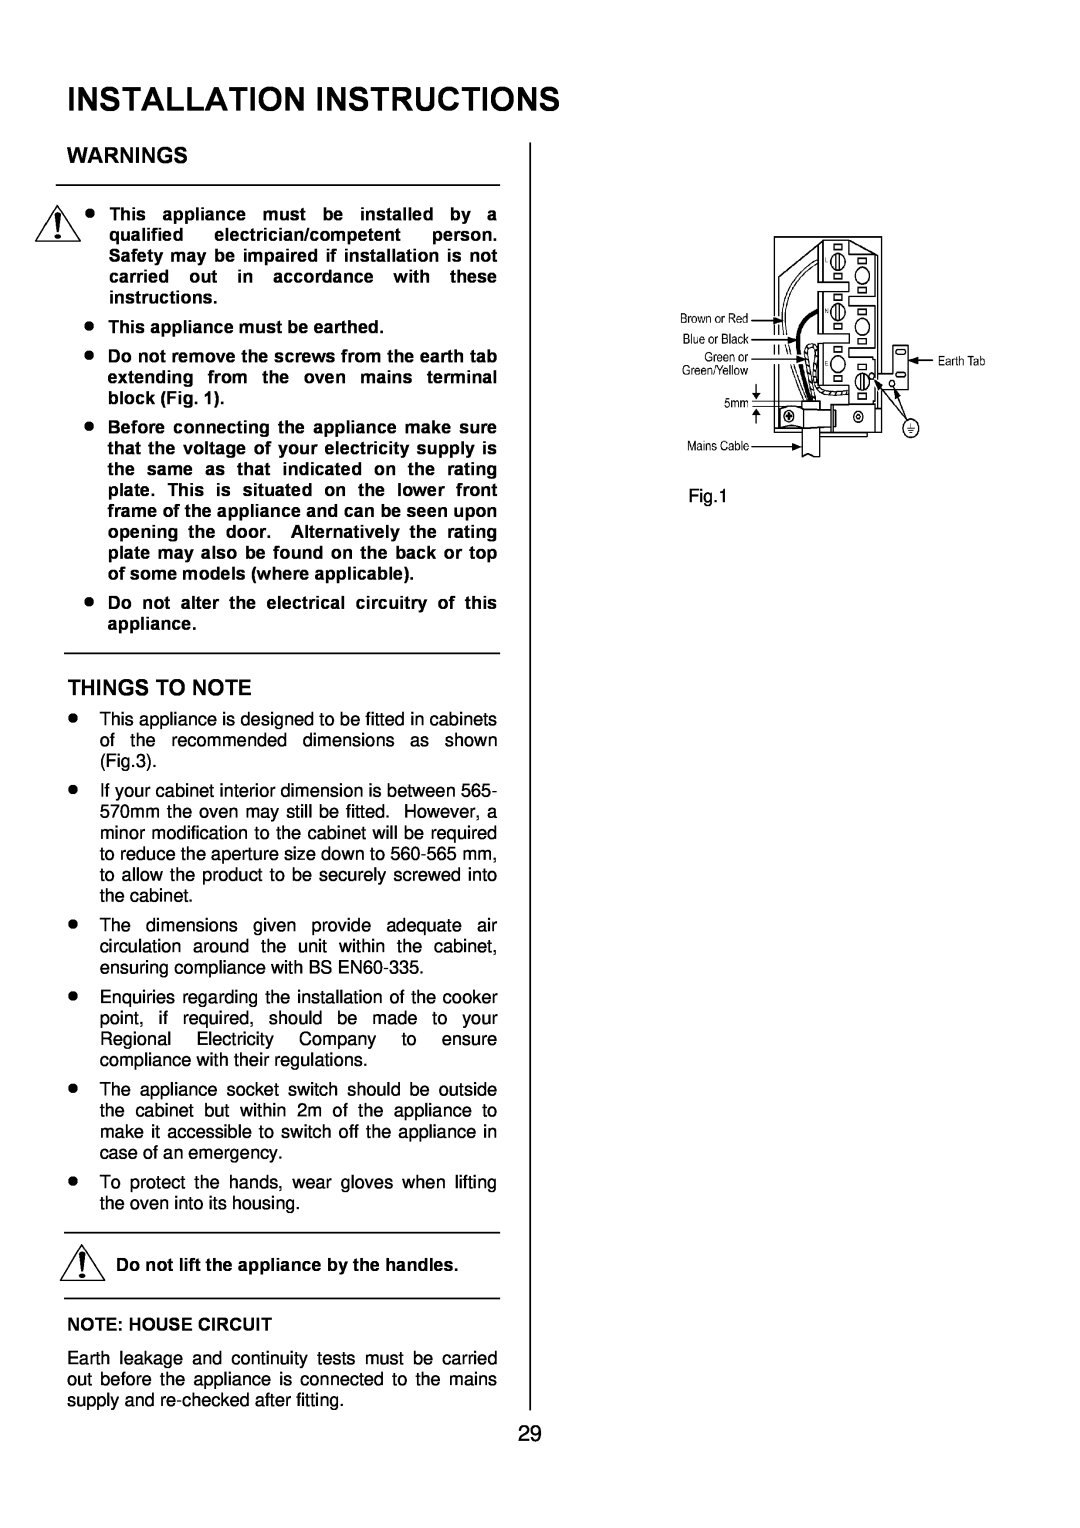 Zanussi ZDF 290 manual Installation Instructions, Warnings, This appliance must be earthed, Things To Note 